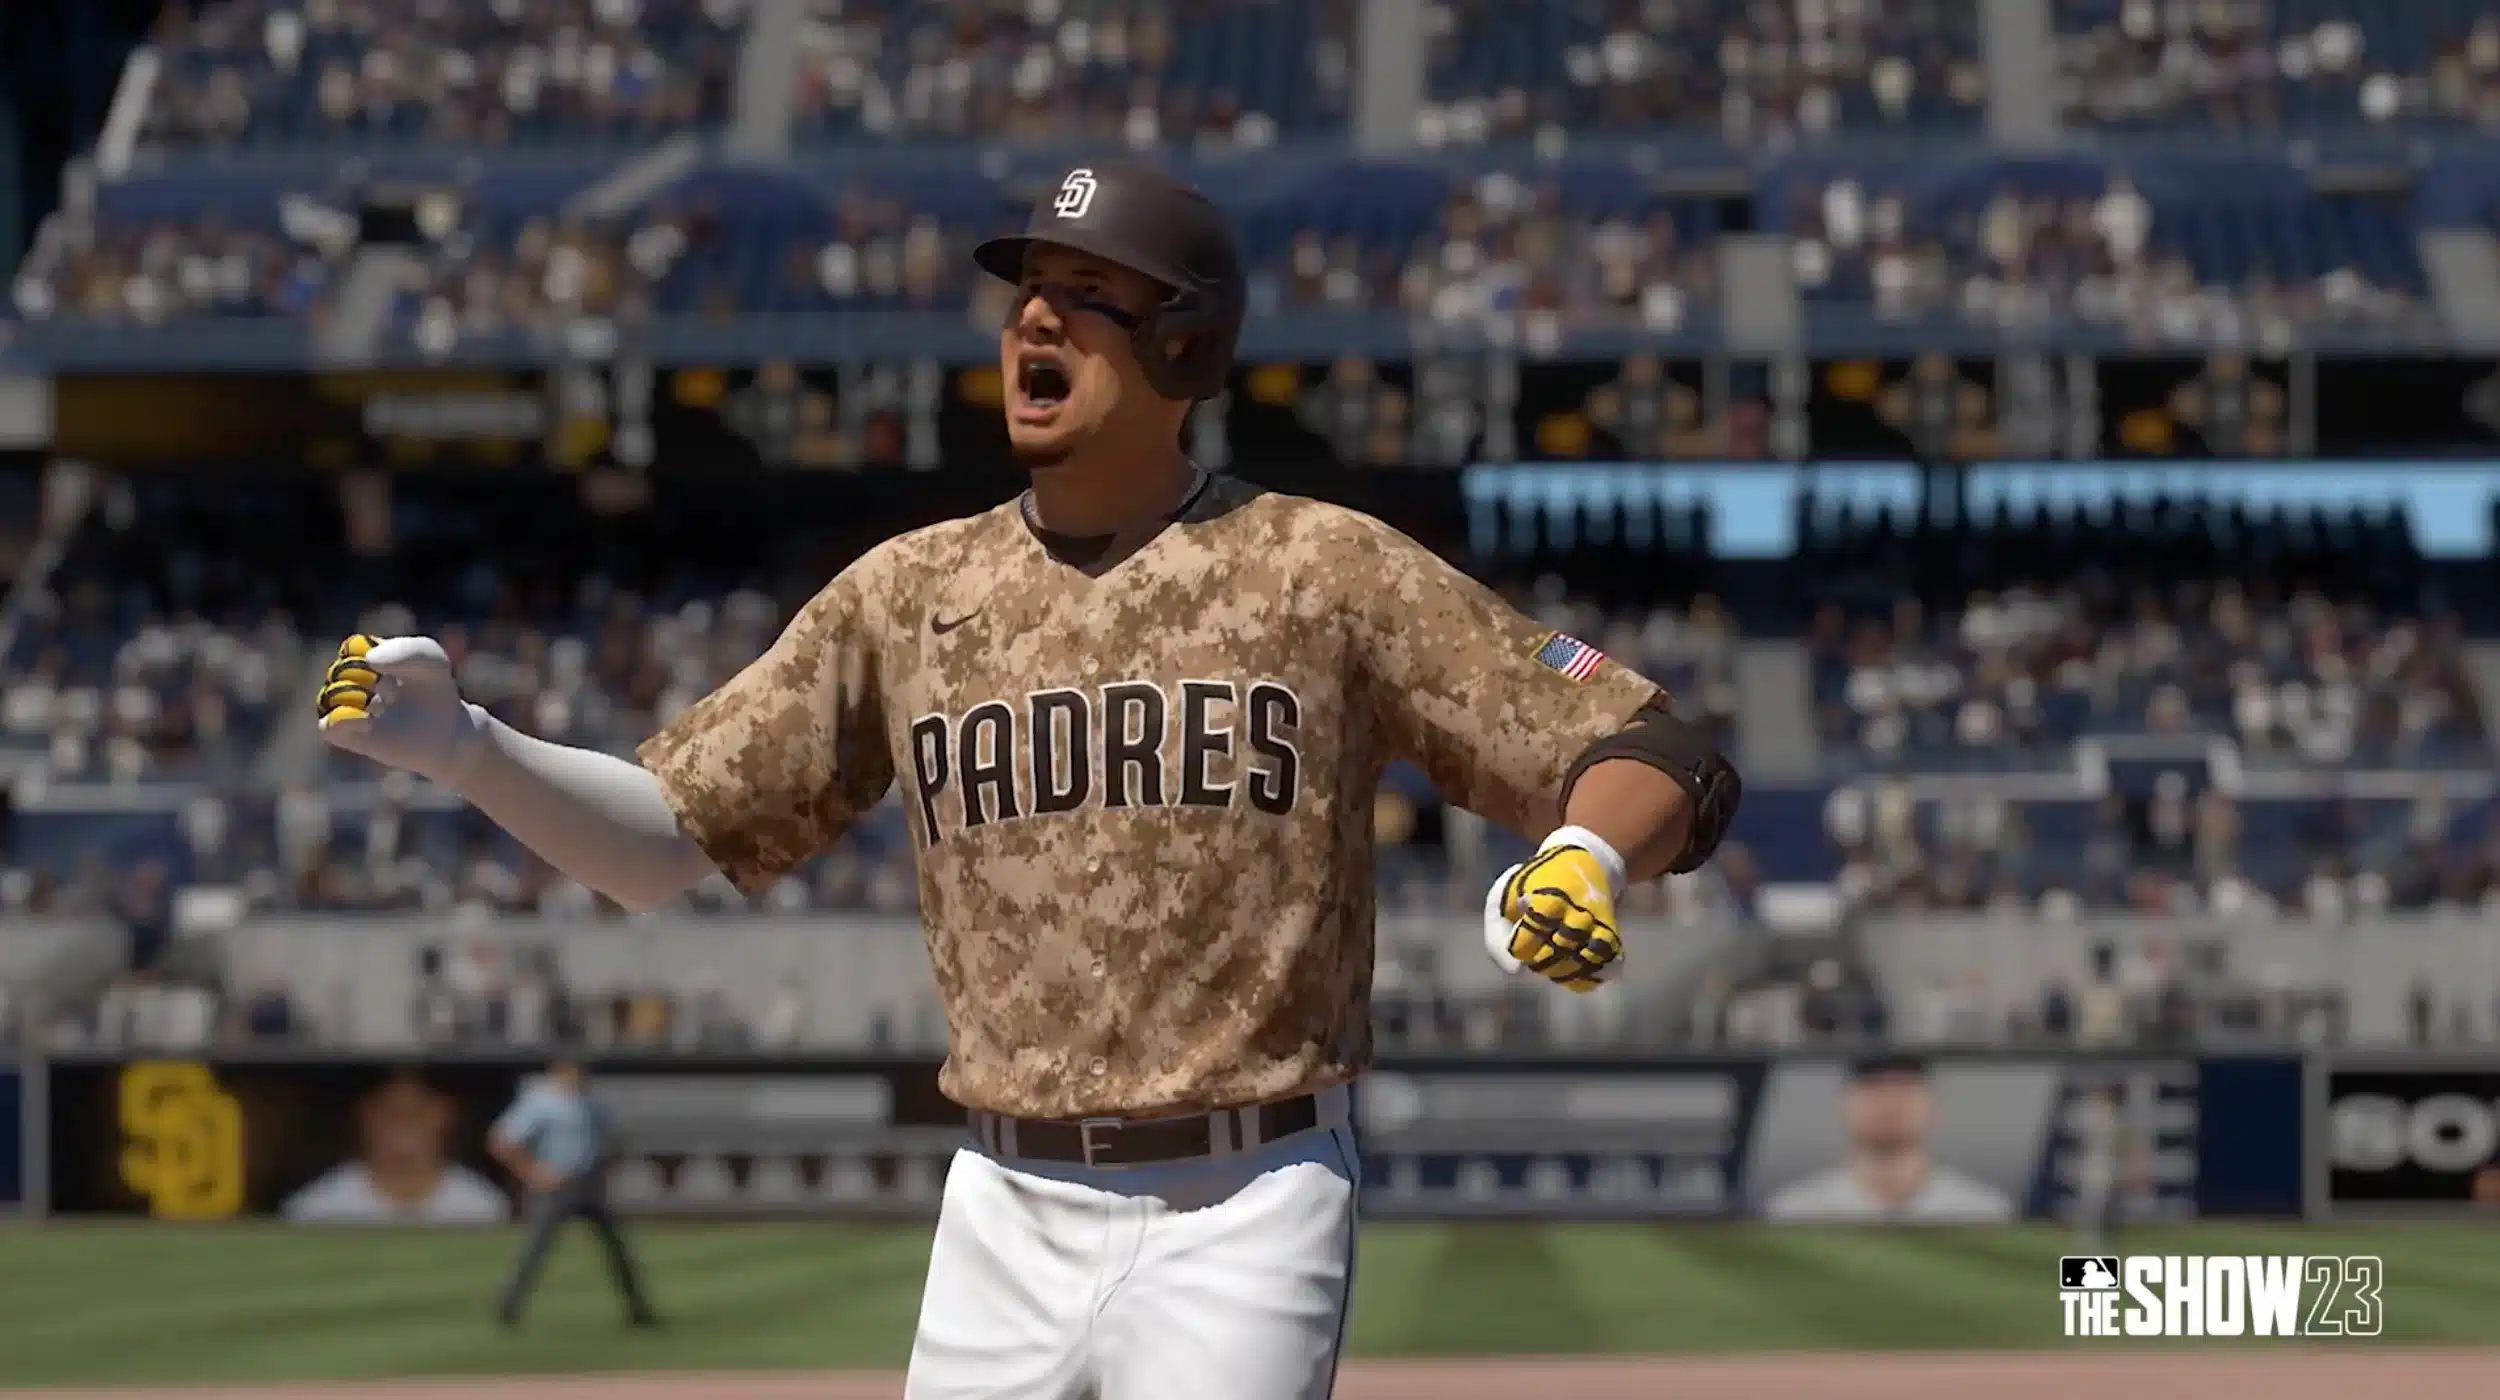 MLB The Show 23 update 1.02